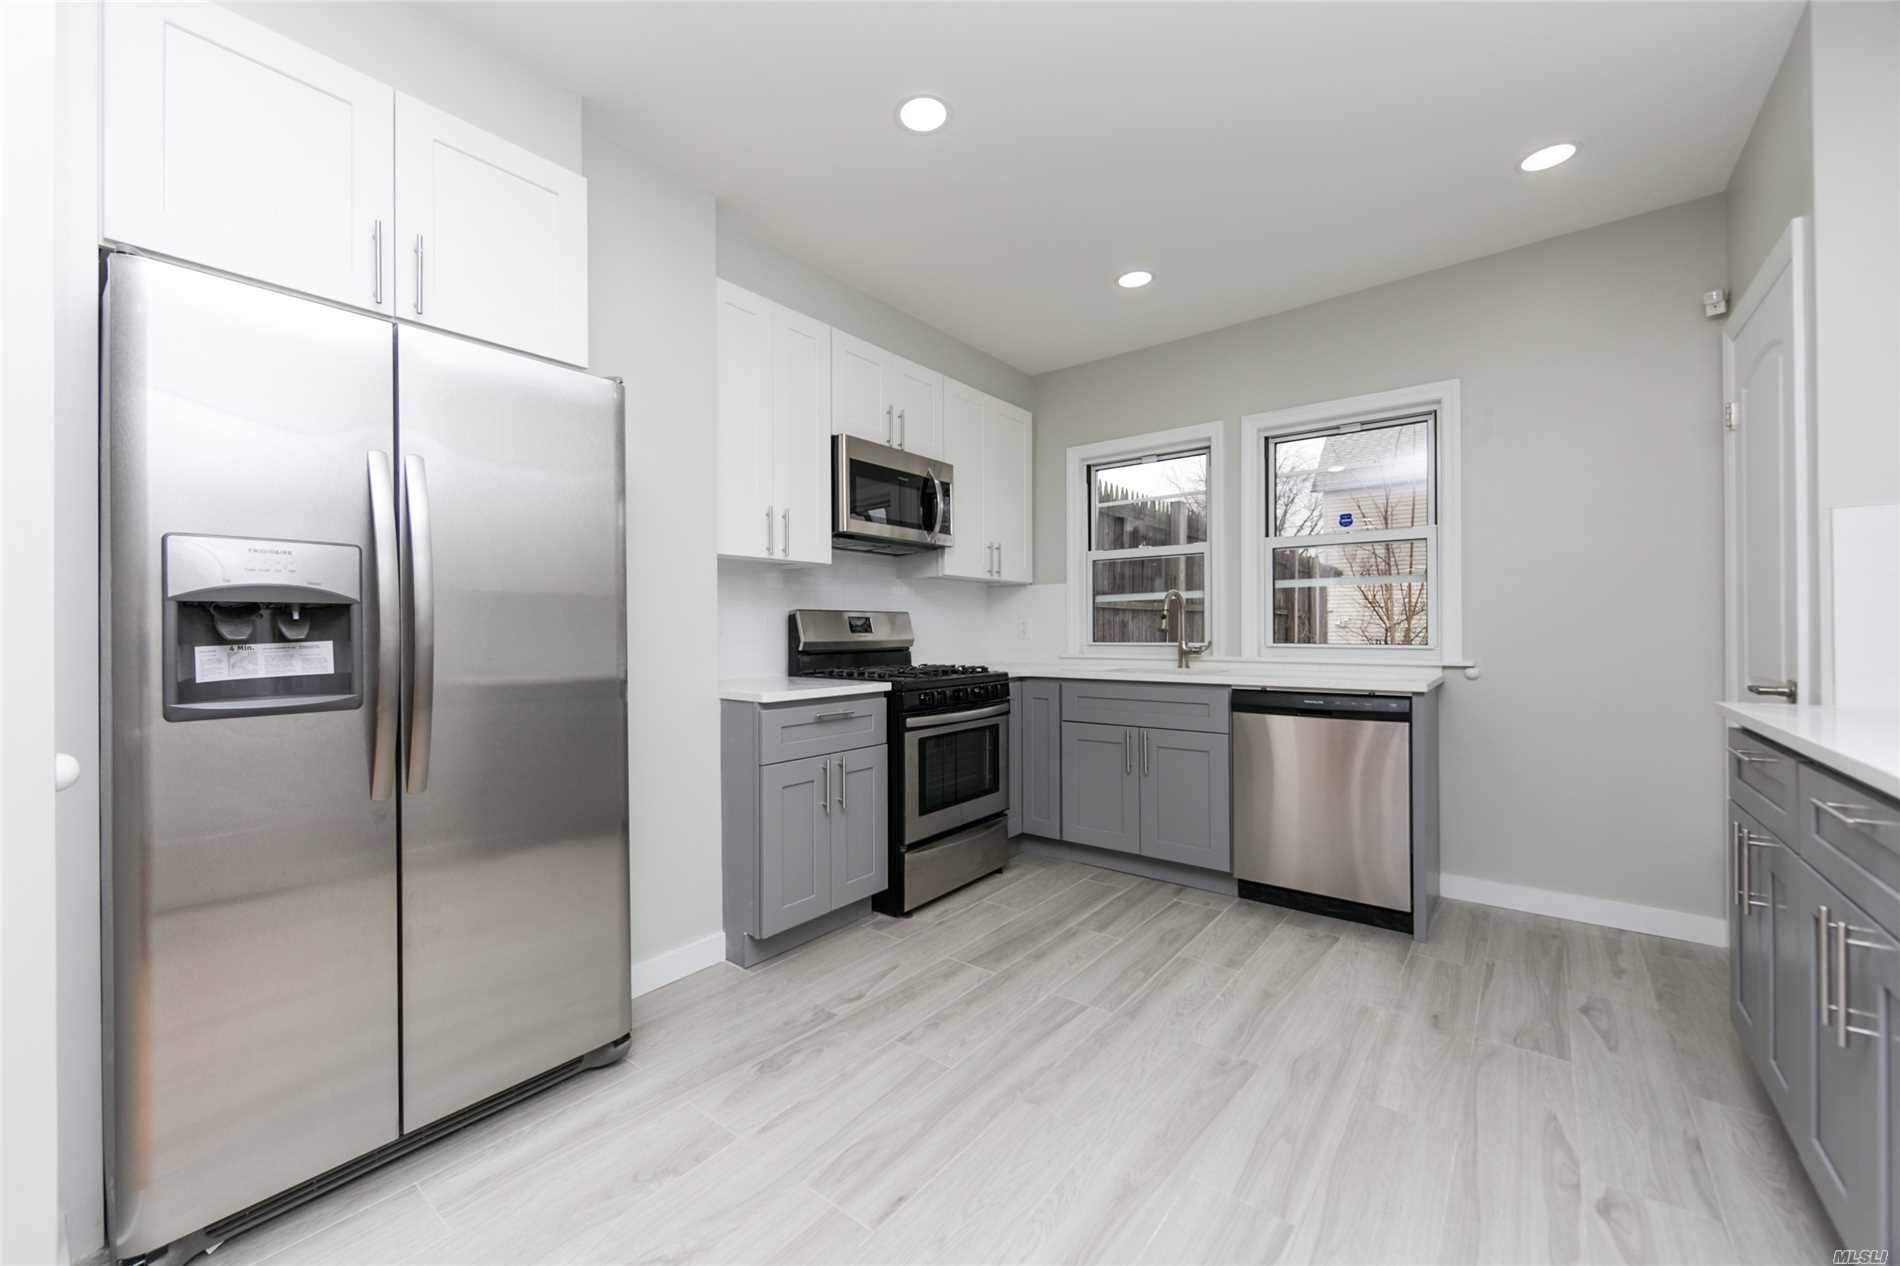 Space And Style Come Together In This Luxuriously Renovated Fully Detached 1 Family Nestled On A Beautiful Tree Lined Street Of South Ozone Park!